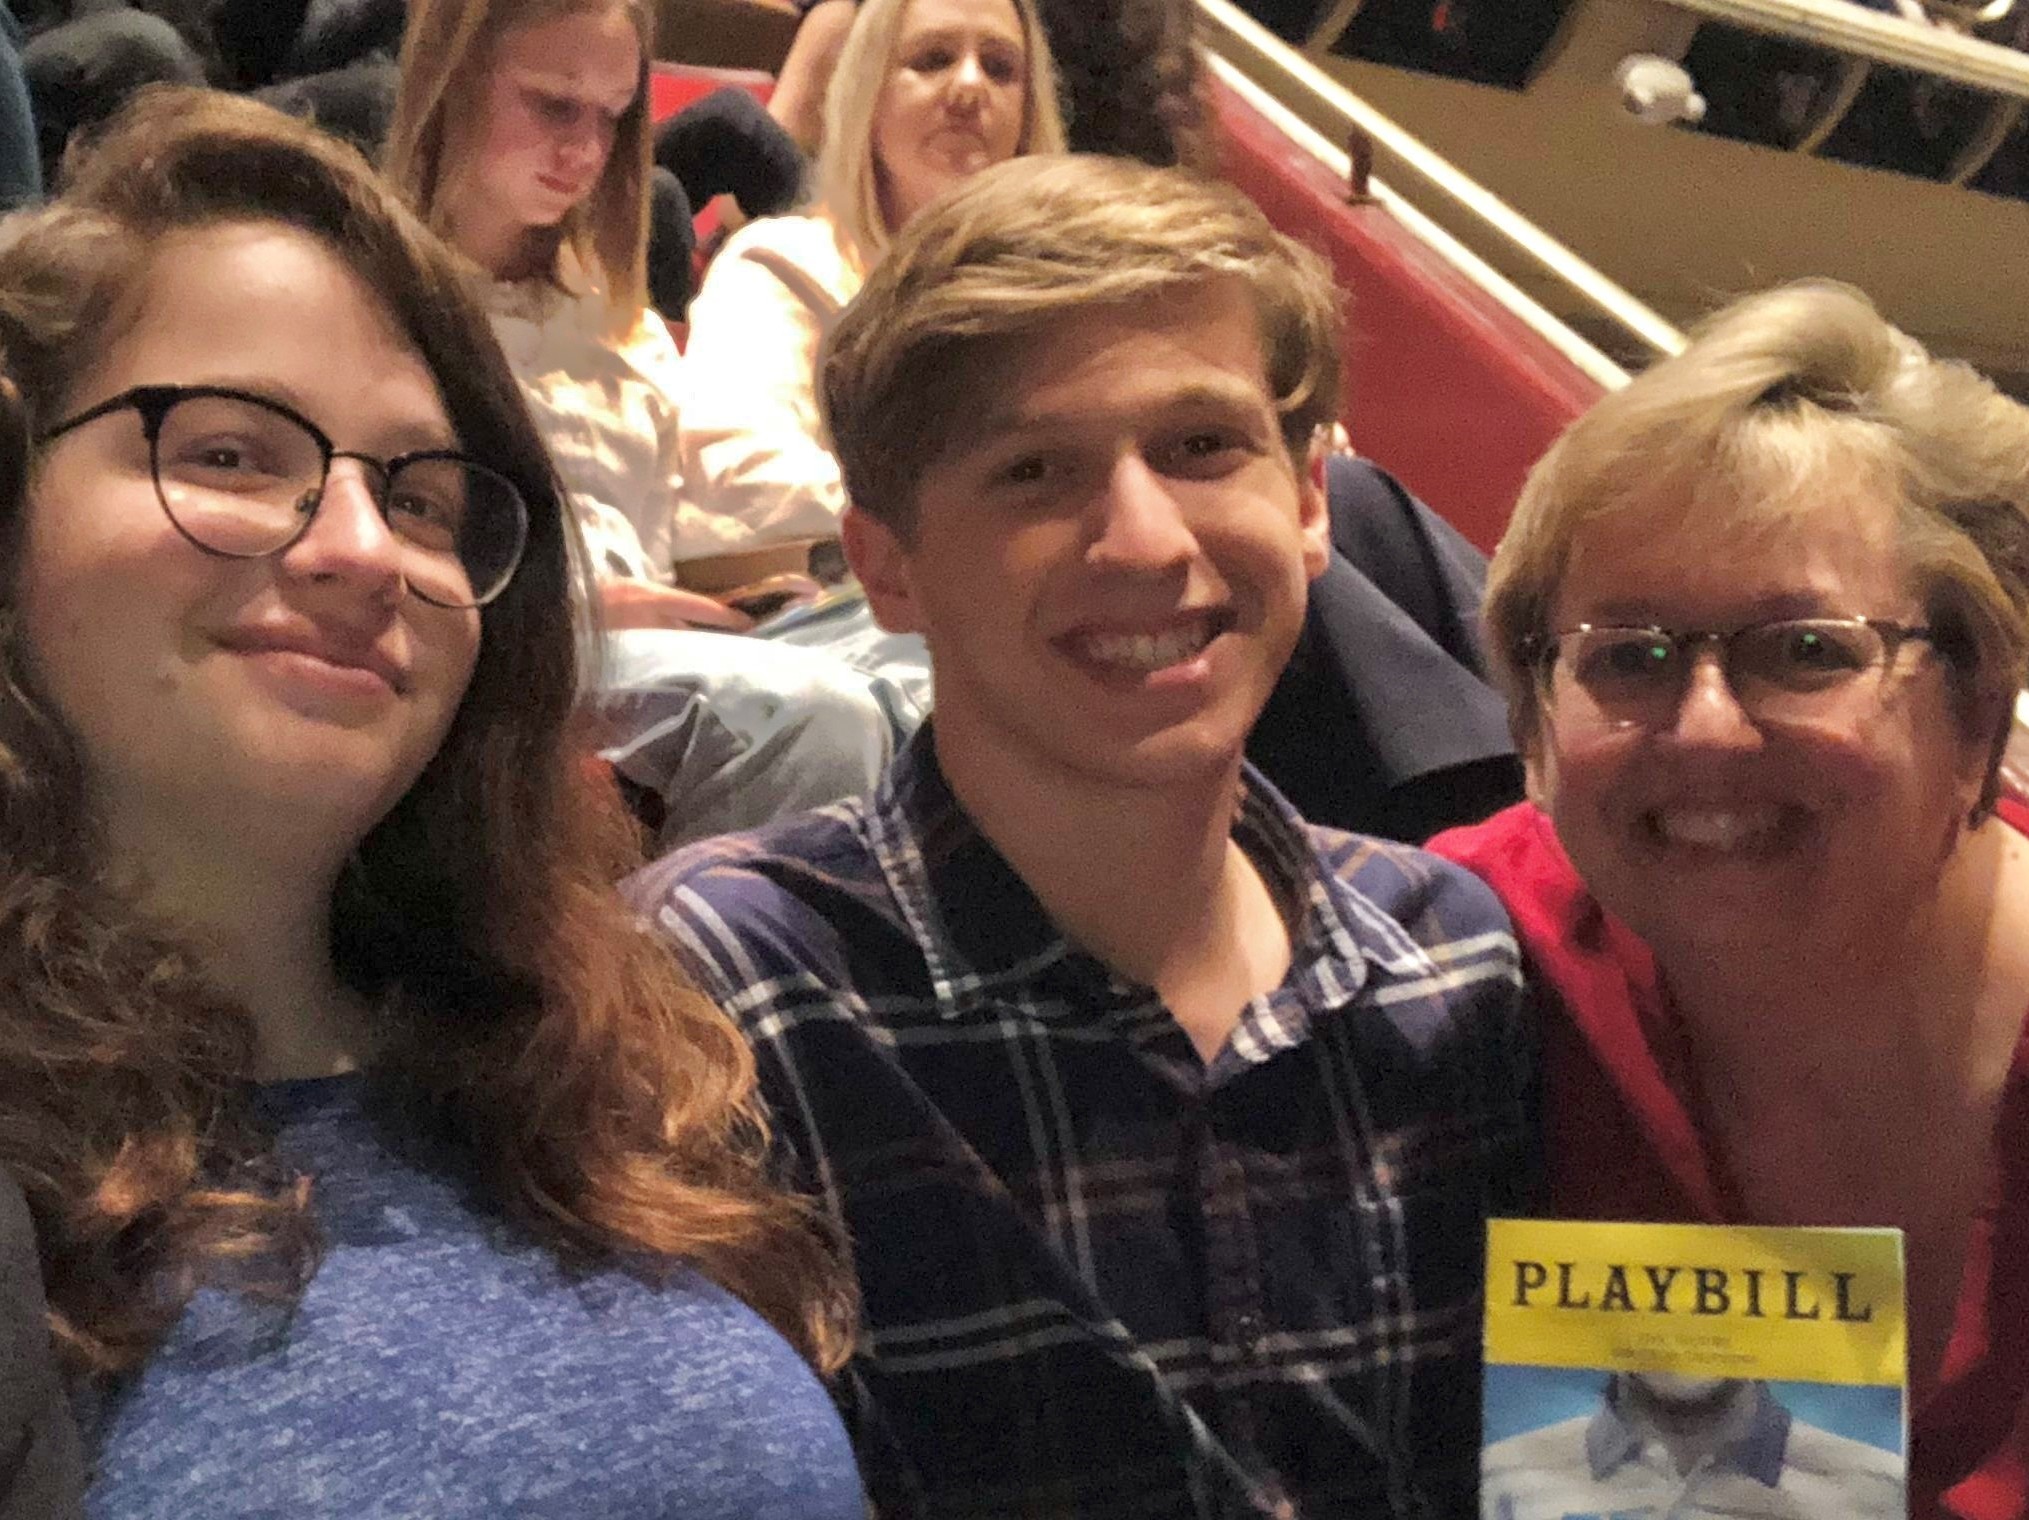 Christine Izzo recently paid $434 for COVID tests so her children could return to class. In January 2020, they attended a play in San Diego, one of the last times they went out as a family before the pandemic hit.